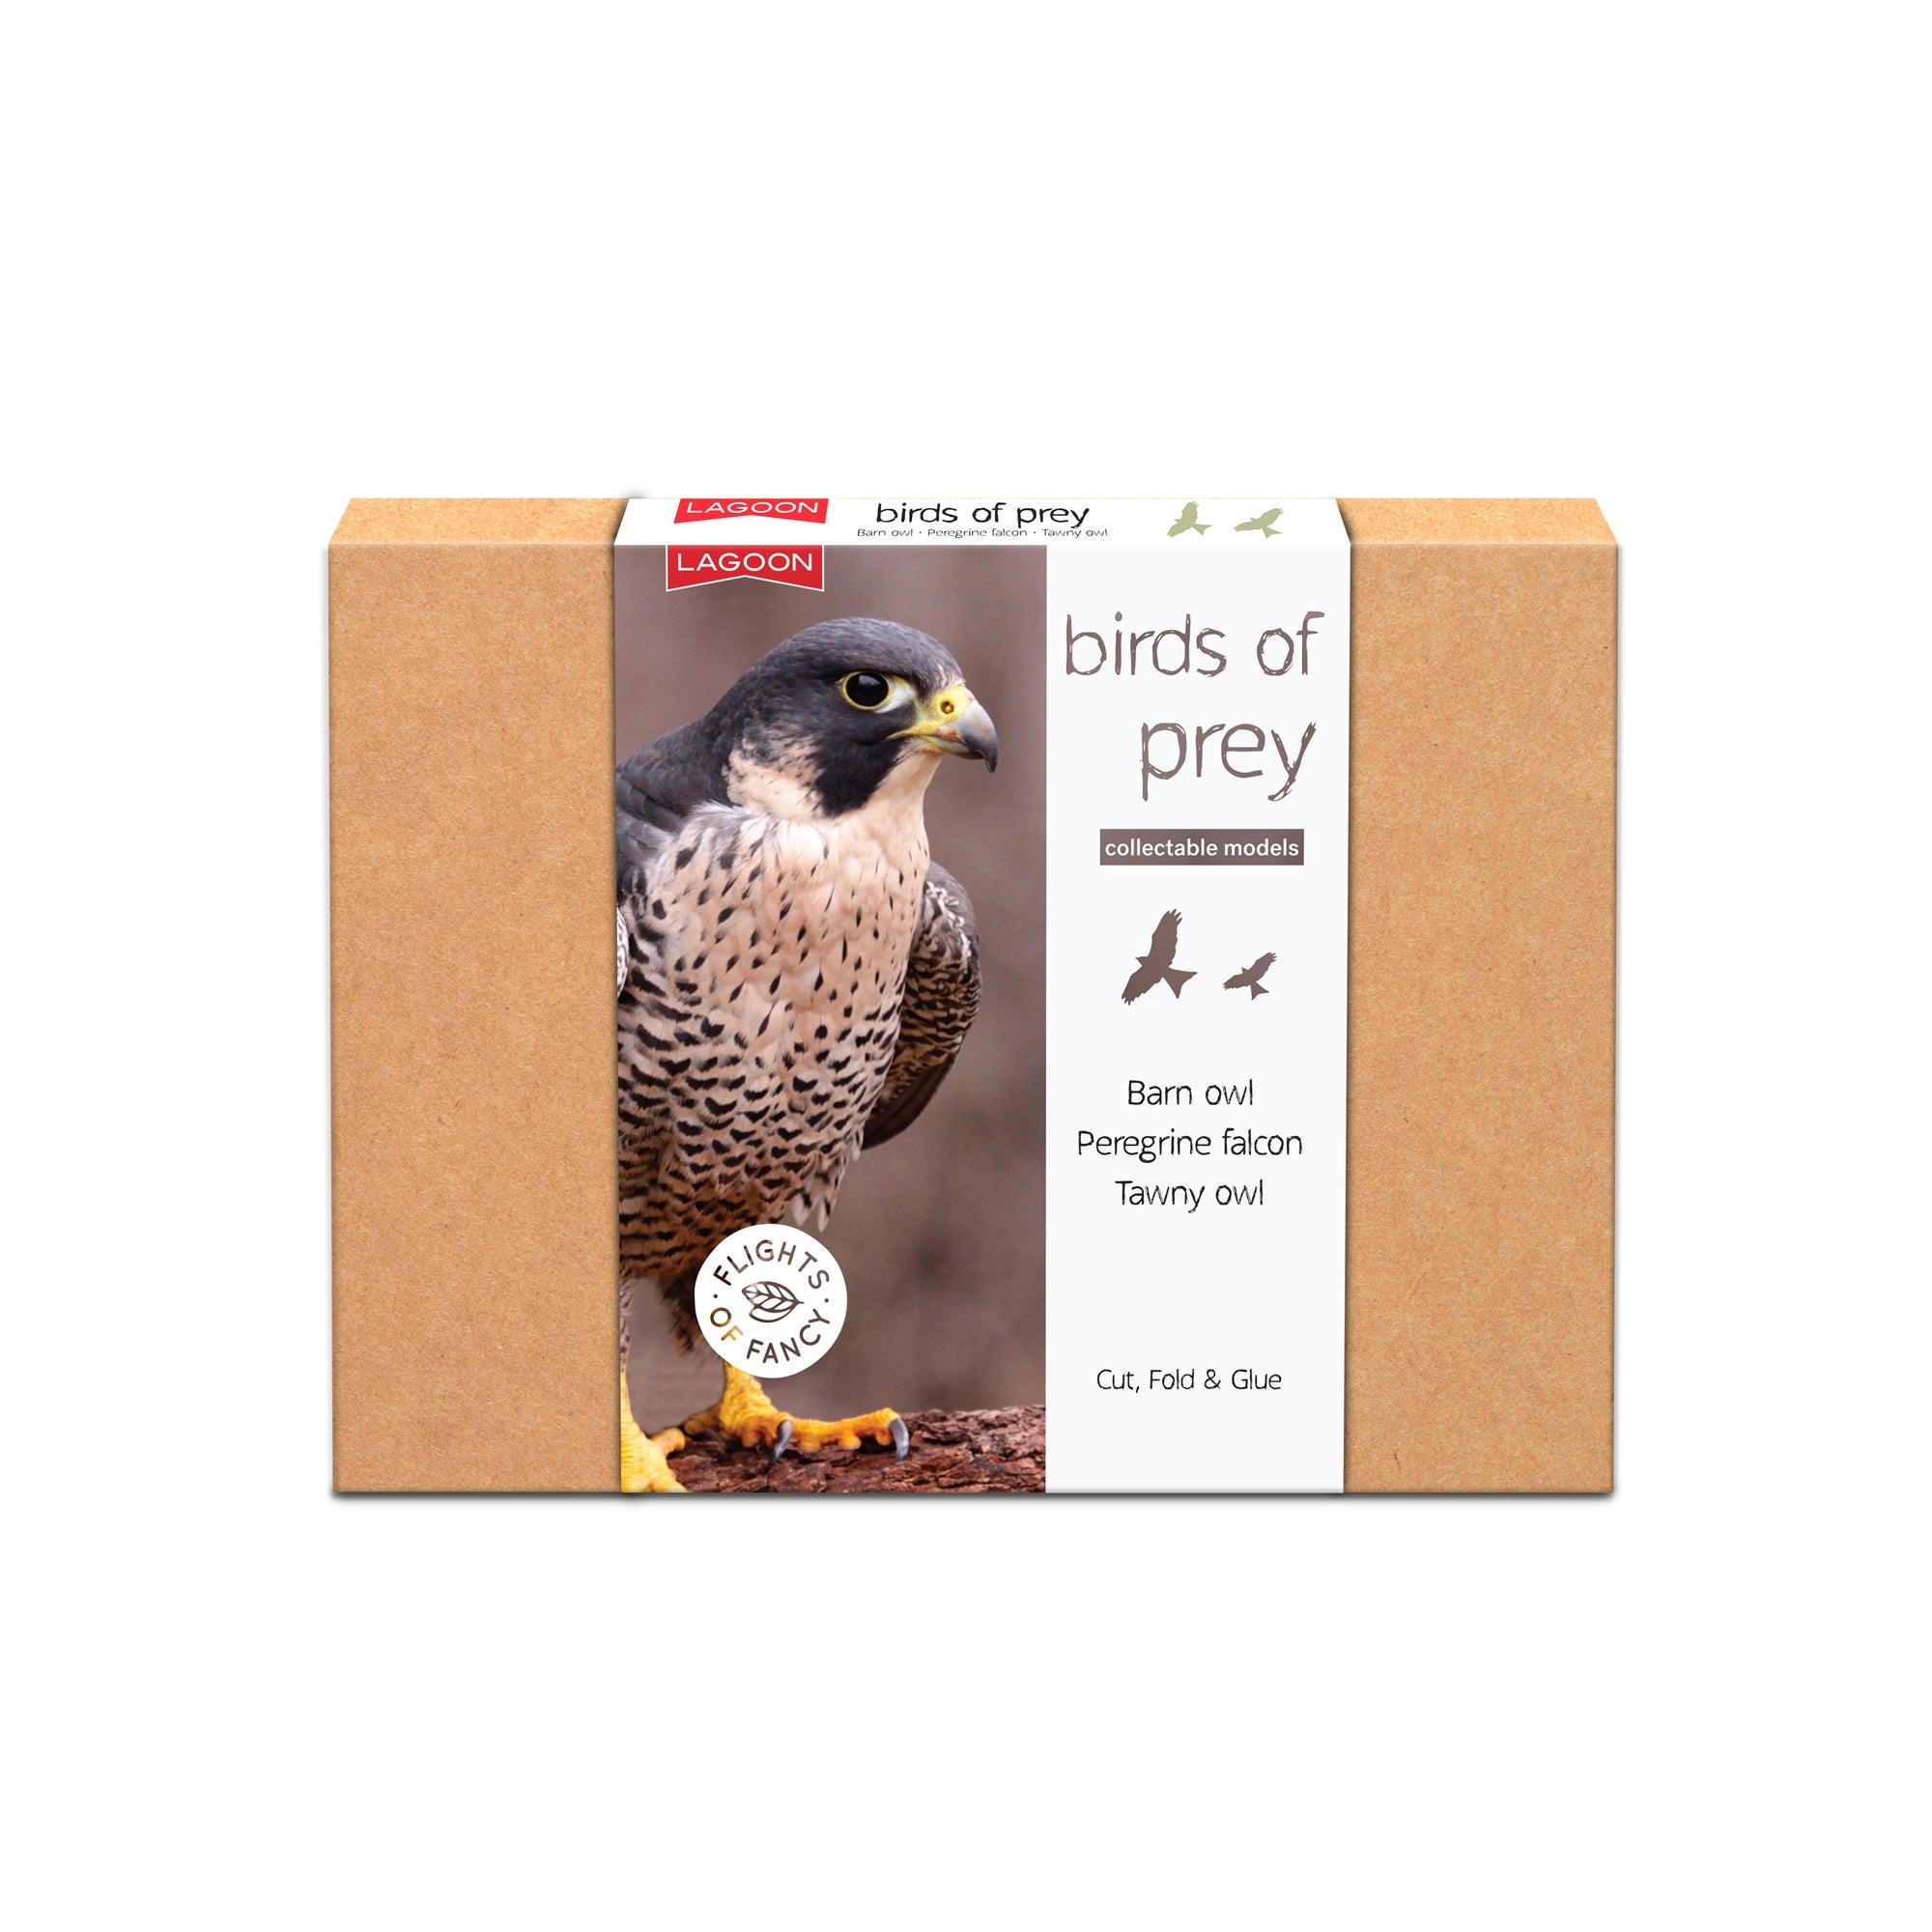 Box with birds of prey image on the front. White background.